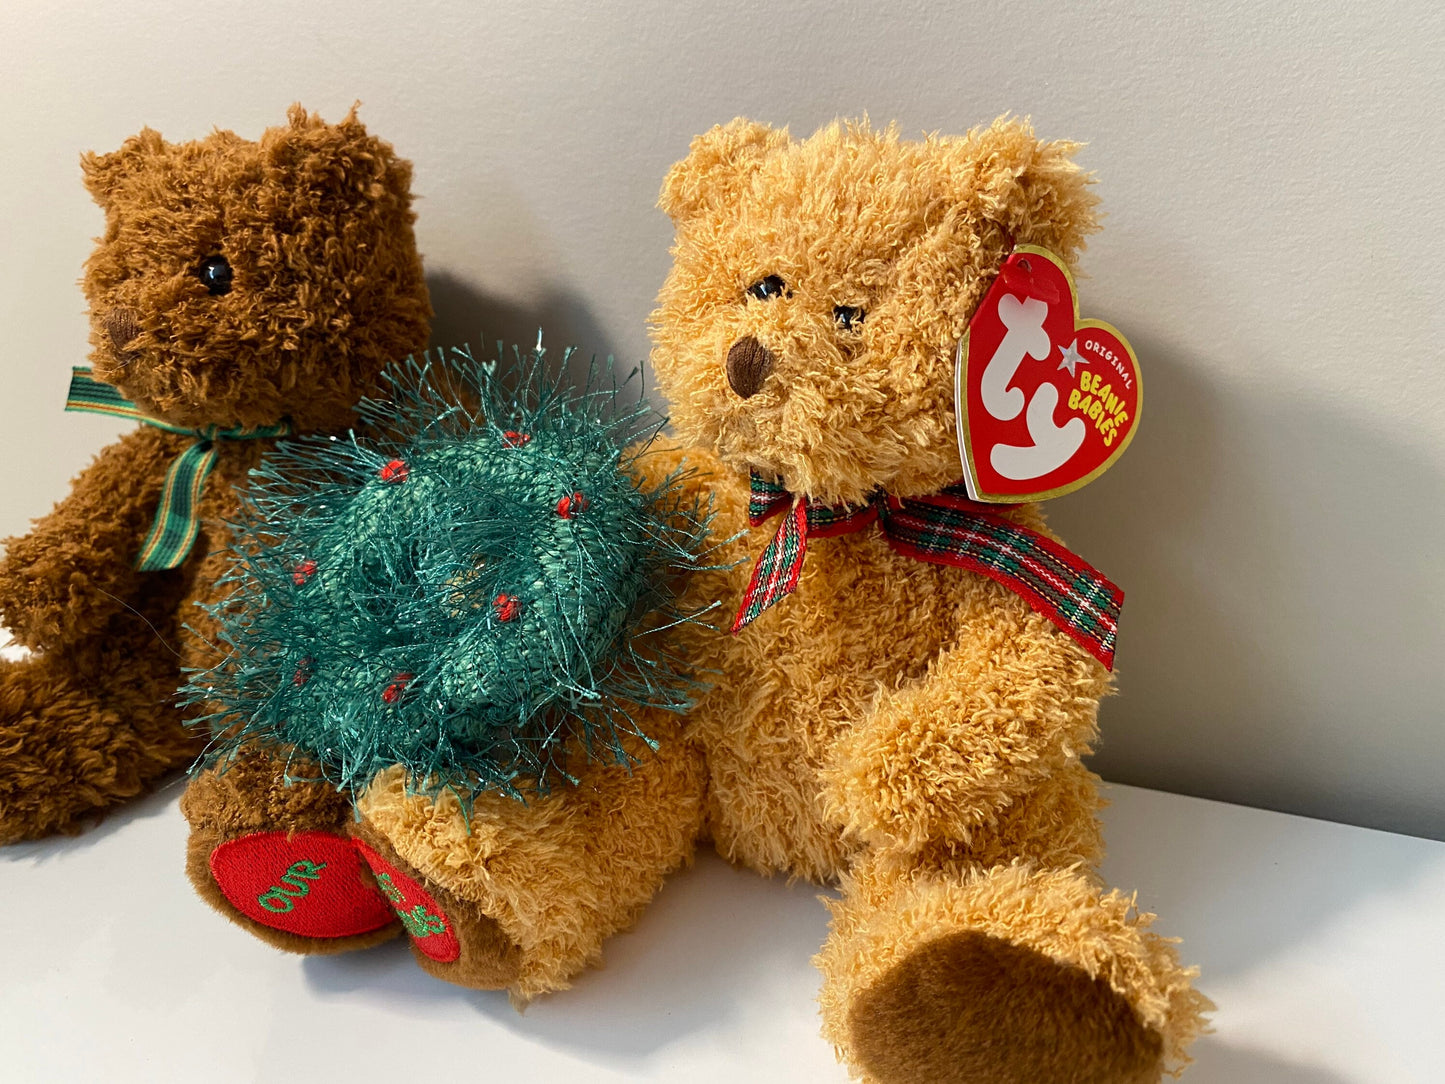 Ty Beanie Baby “Merry Kiss-mas” the Joined Bears Holding Wreath - Our First Christmas on feet